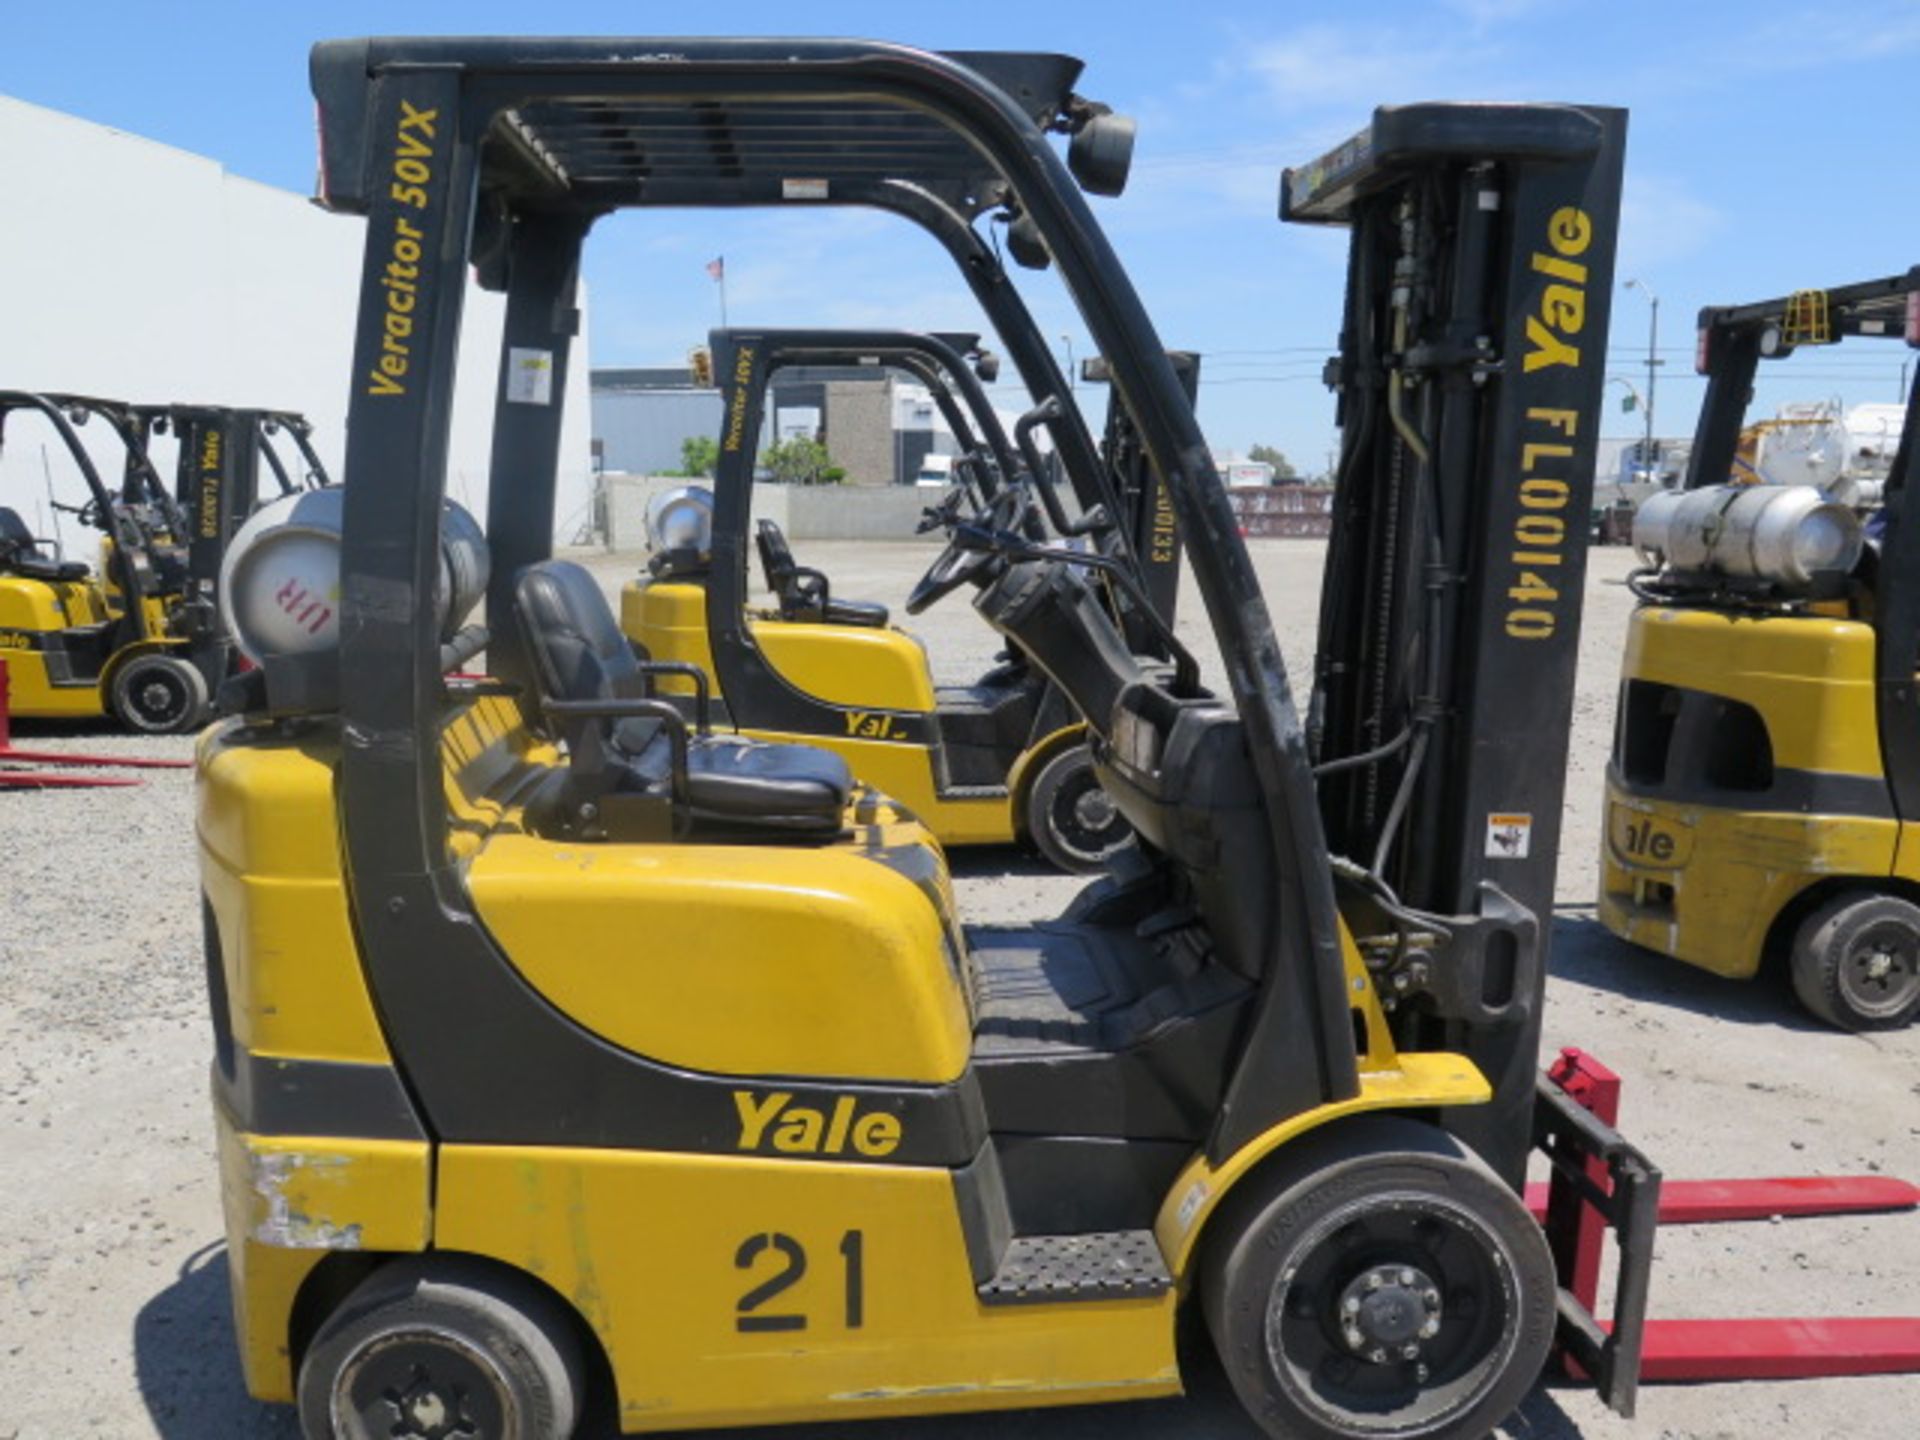 2012 Yale GLC050VXNVSE083 5000 Lb LPG Forklift s/n A910V17195J w/ 3-Stage, 189” Lift, SOLD AS IS - Image 6 of 18